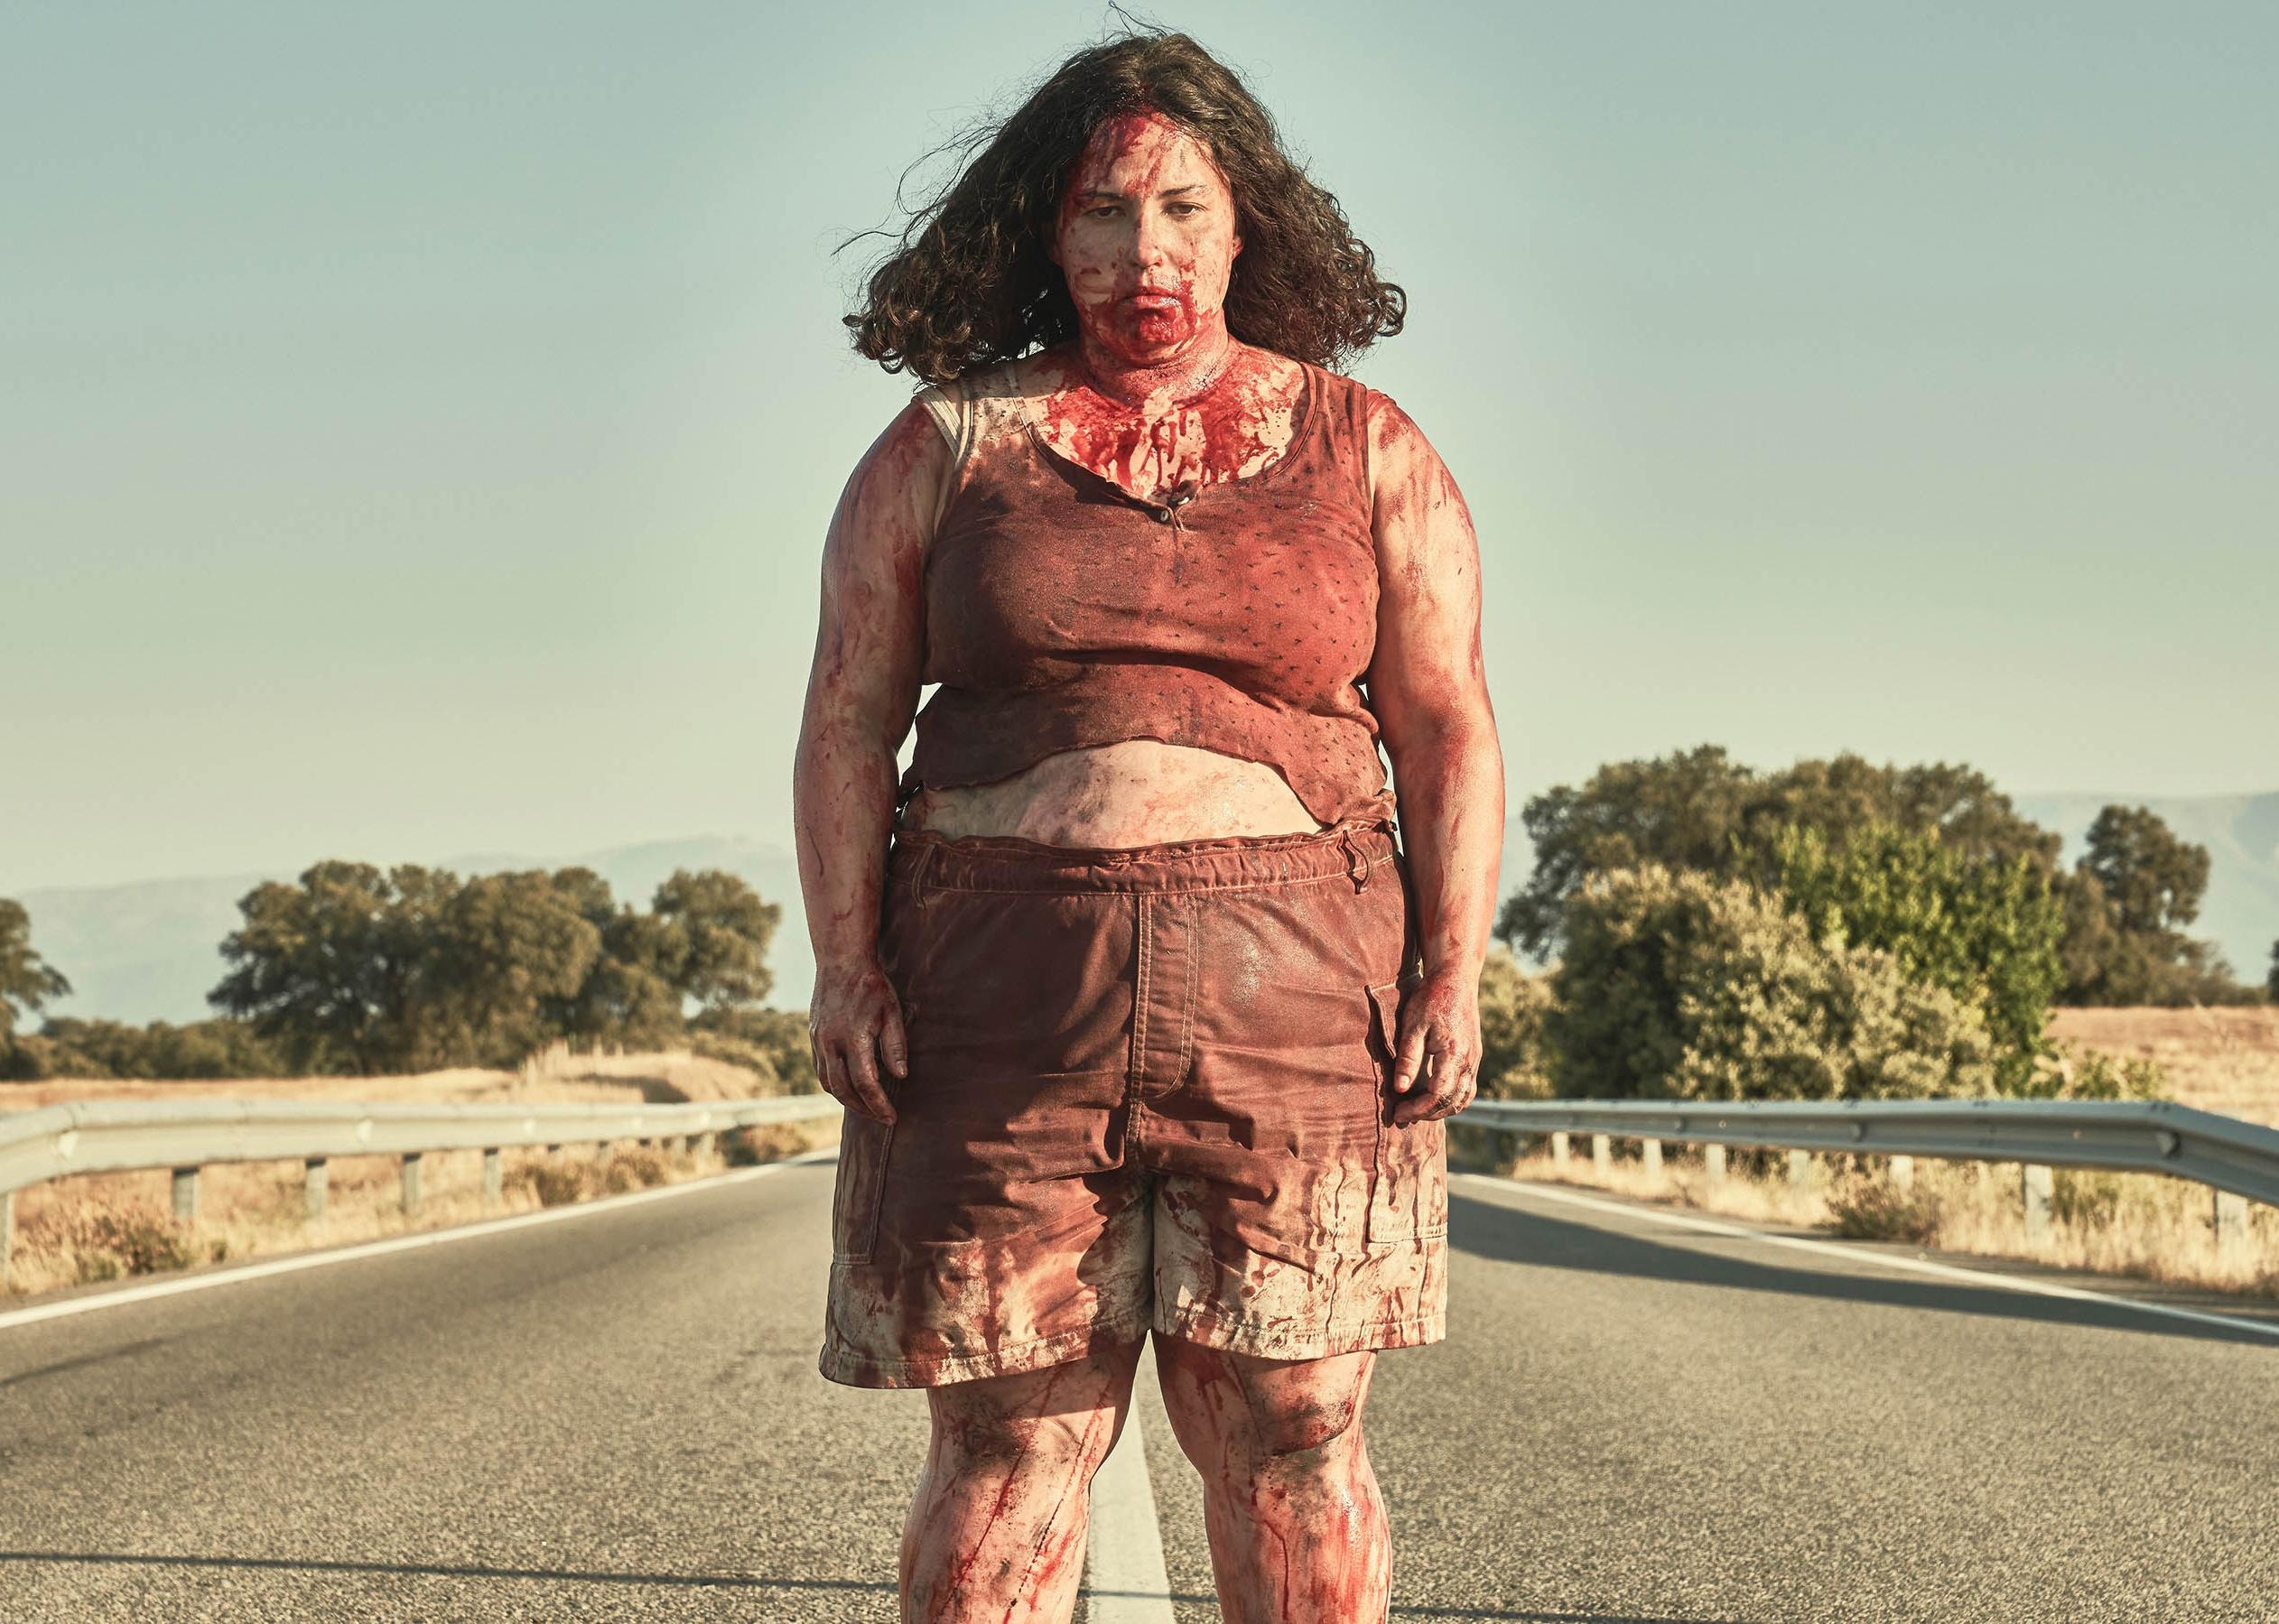 A woman standing on a highway in shorts and a tank top covered in blood.